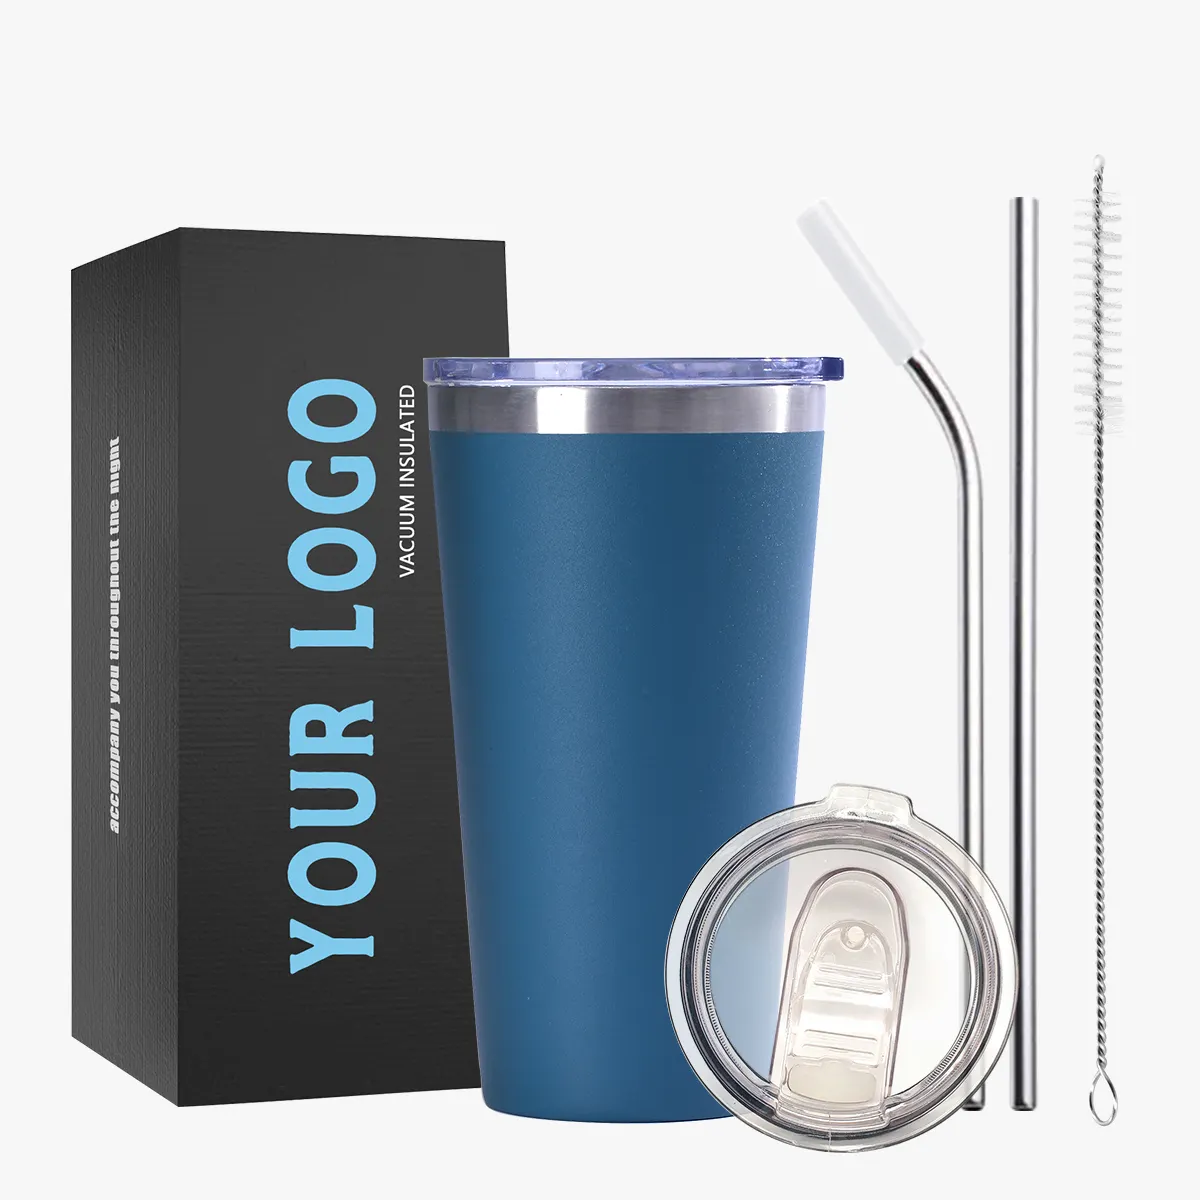 Travel Coffee Mug Stainless Steel Travel Mug New Arrival Premium Cup for Travel